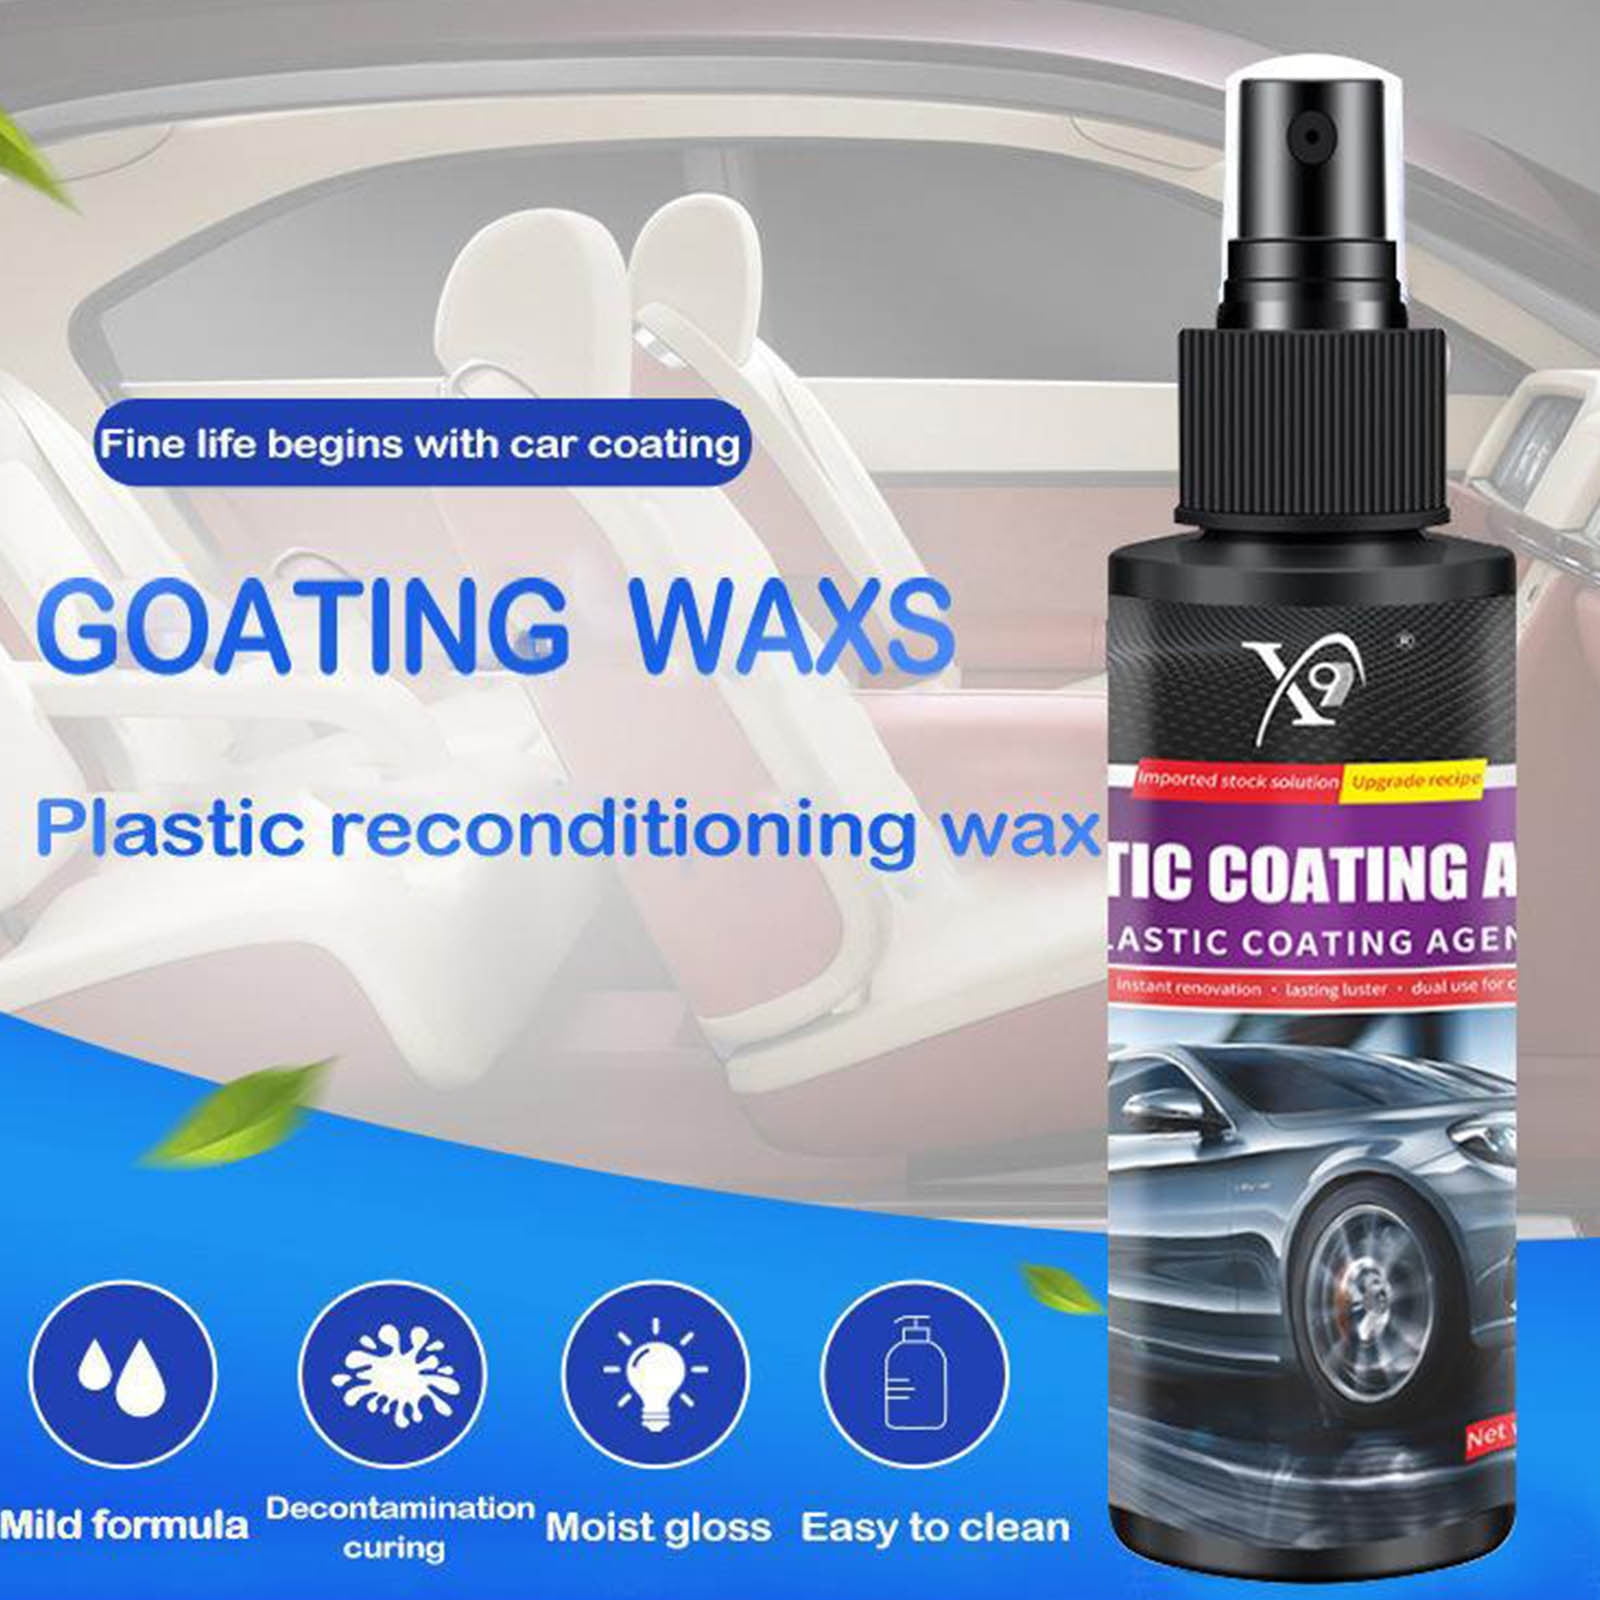 SHENGXINY Car Care & Cleaning Plastic Parts Crystal Coating, Car Exterior  Restorer, Easy To Use Car Refresher, Plastic Parts Refurbish Agent Repair